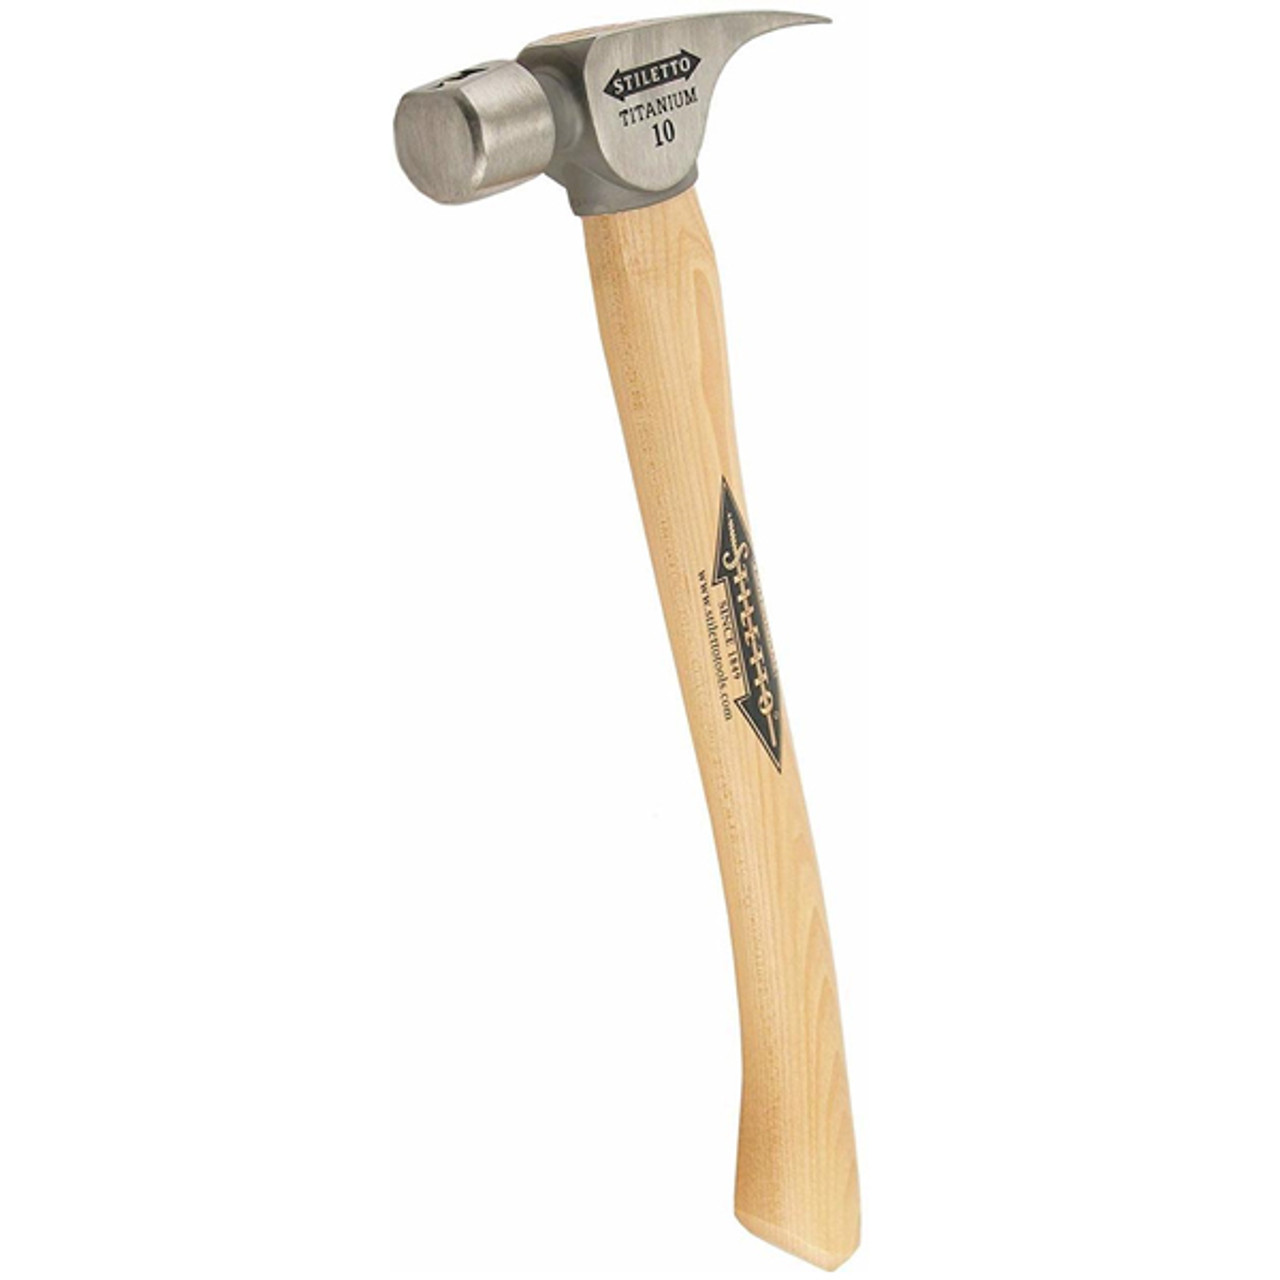 Stiletto FH10C, 10oz Titanium Finish Hammer, Smooth Face, 14.5 Curved Hickory Handle